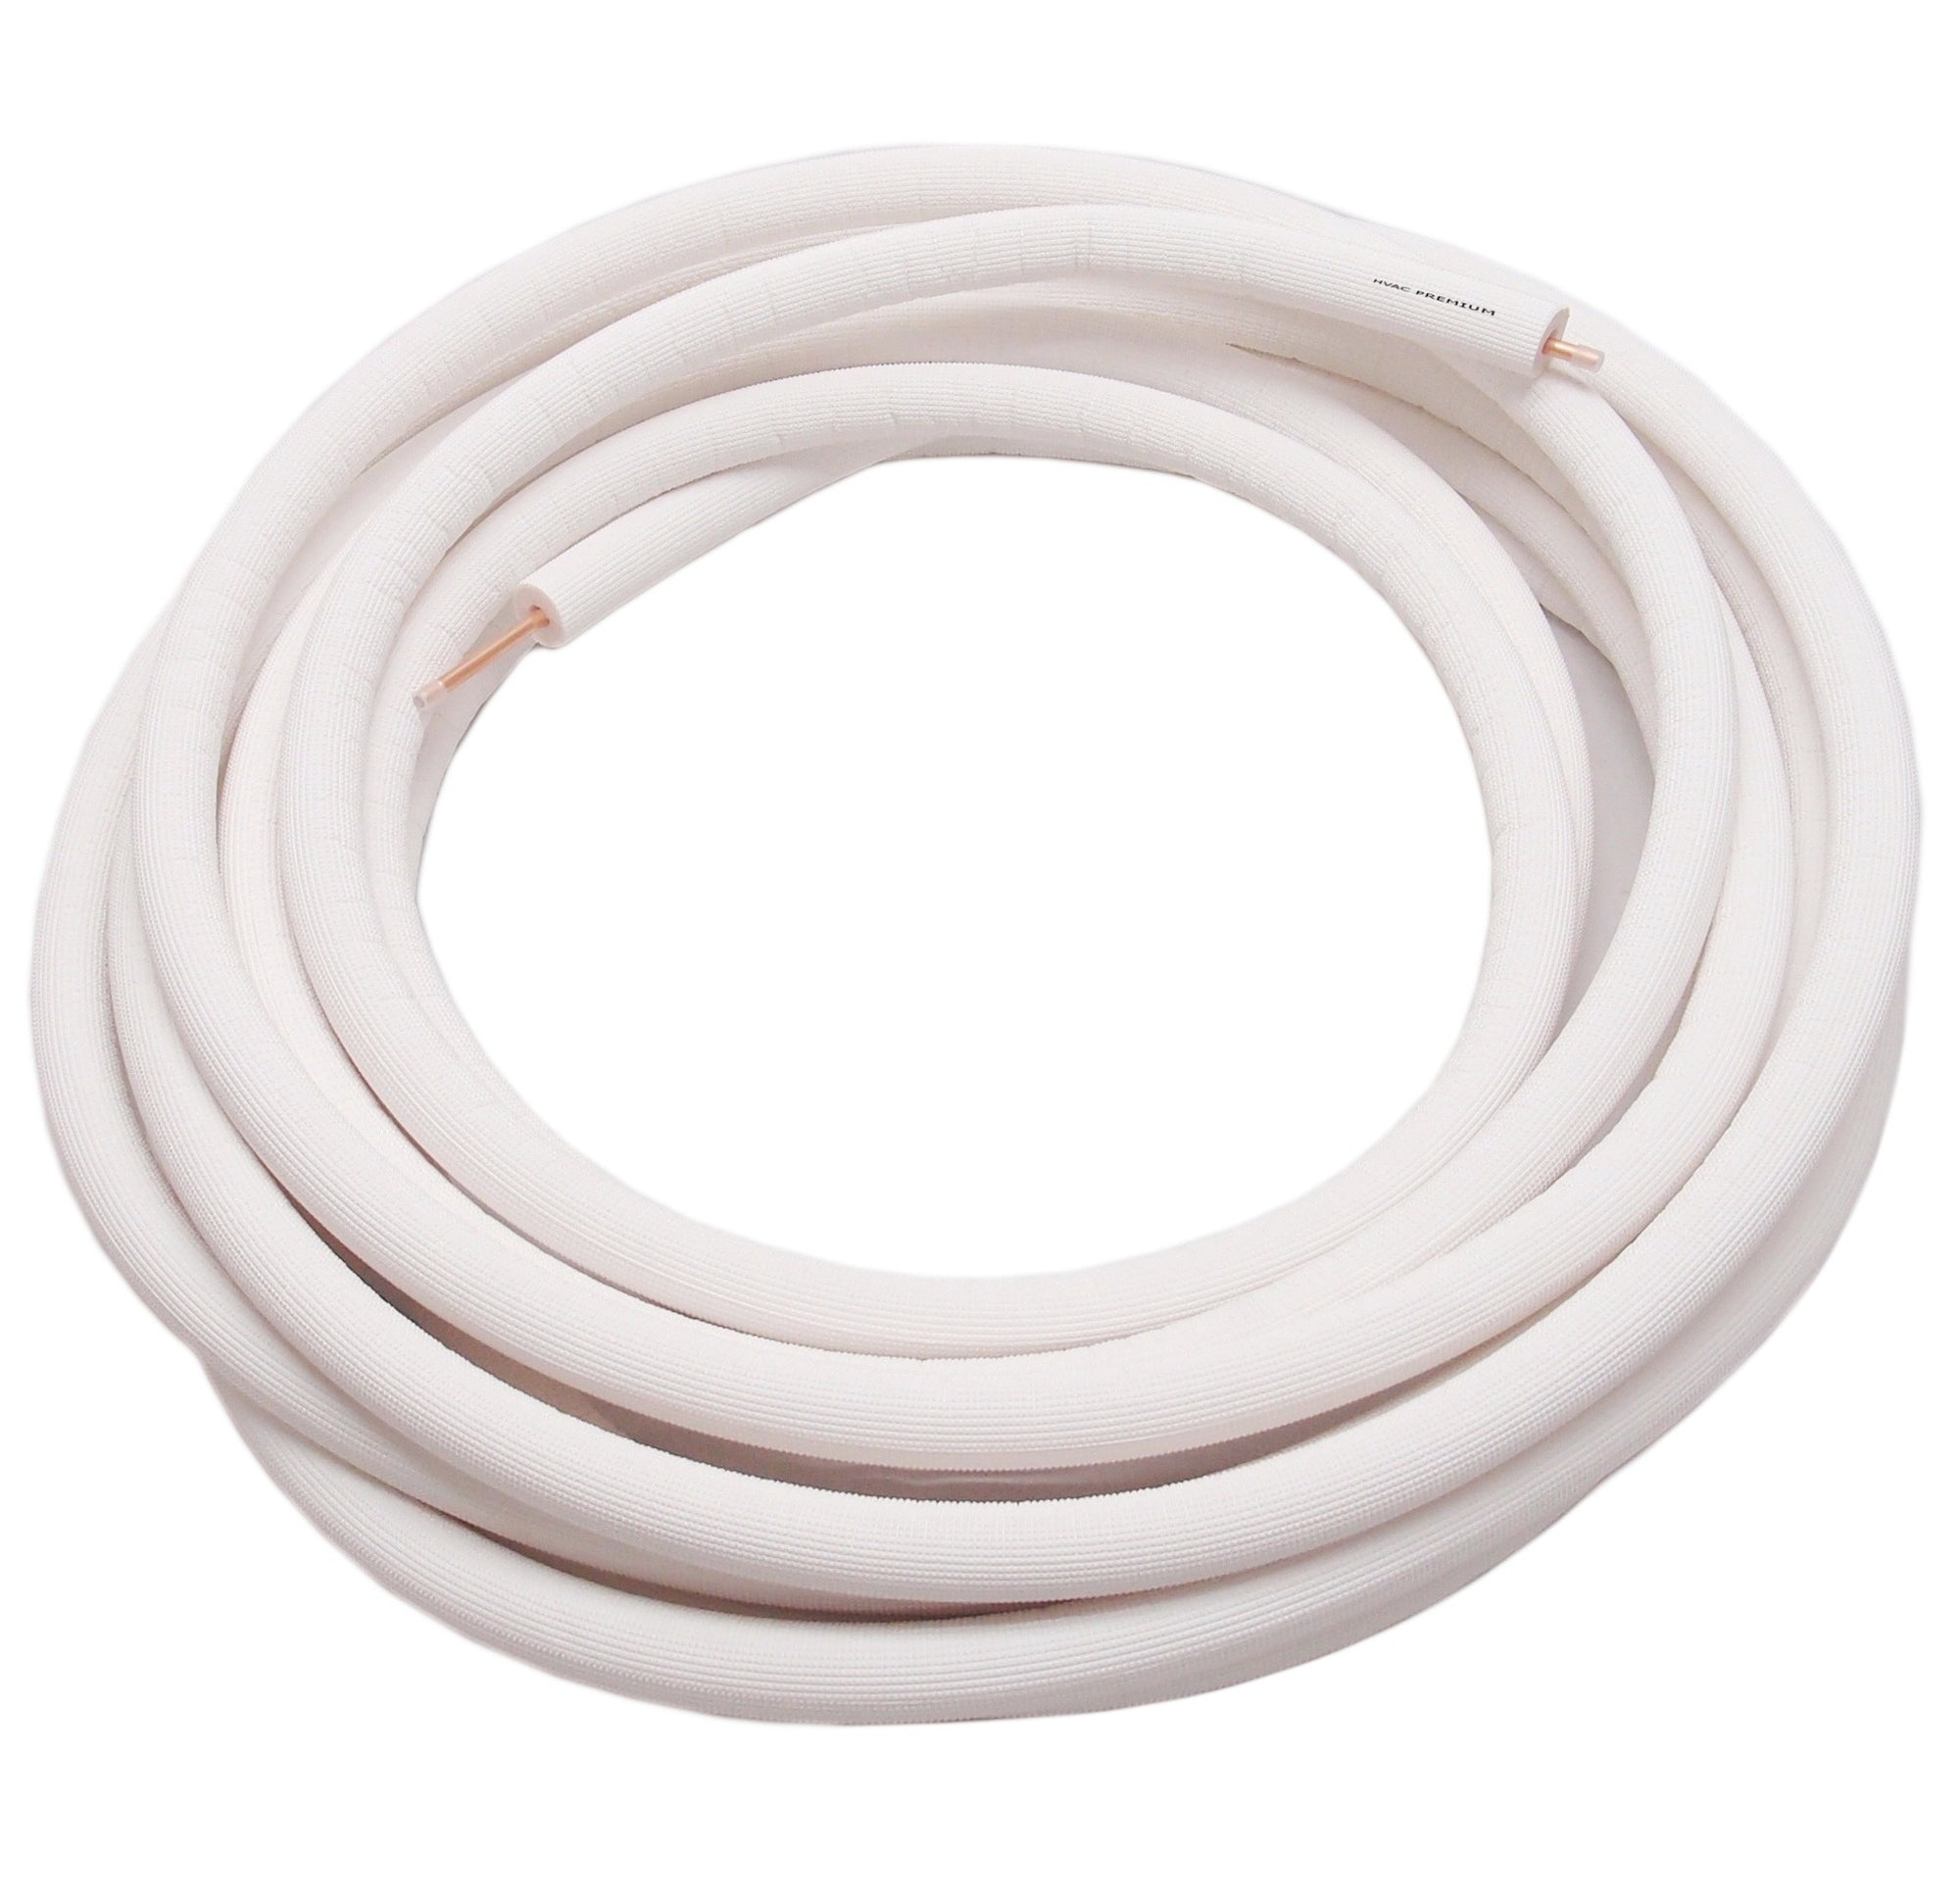 1/4" Insulated Copper Coil Line - Seamless Pipe Tube for HVAC, Refrigerant - 1/2" White Insulation - 35' Long